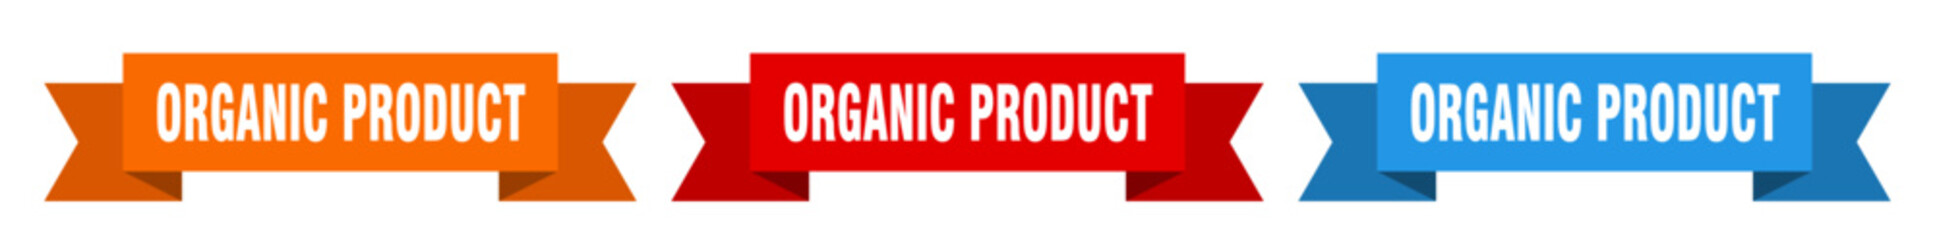 organic product ribbon. organic product isolated paper sign. banner